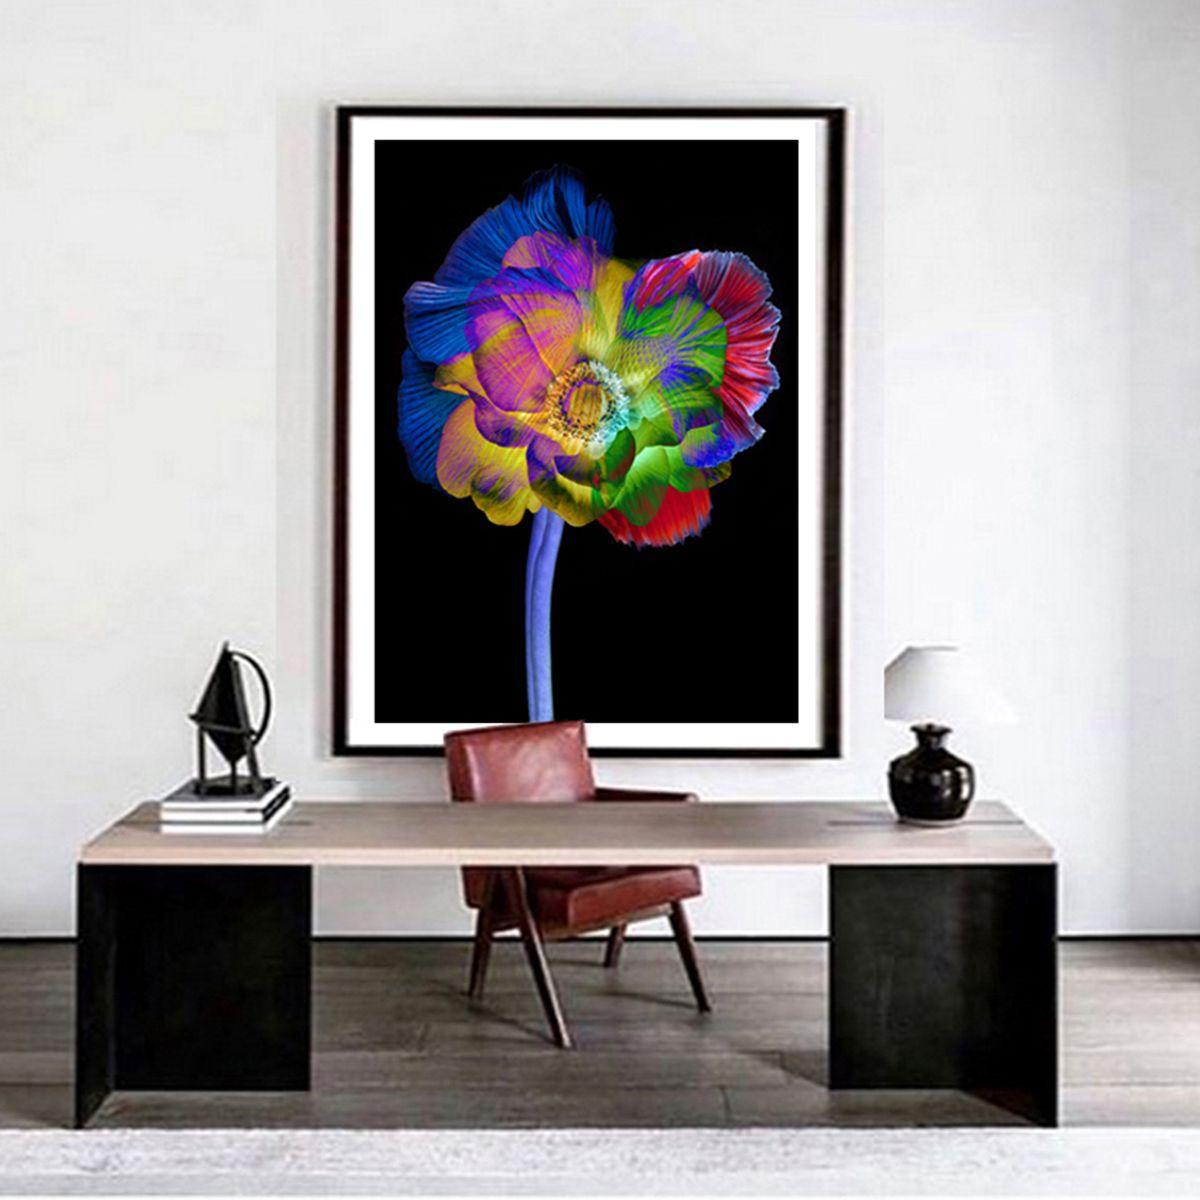 Photograph of a colored flower on black. Printed on archival fine art paper. :: Photograph :: Color :: This piece comes with an official certificate of authenticity signed by the artist :: Ready to Hang: No :: Signed: Yes :: Signature Location: